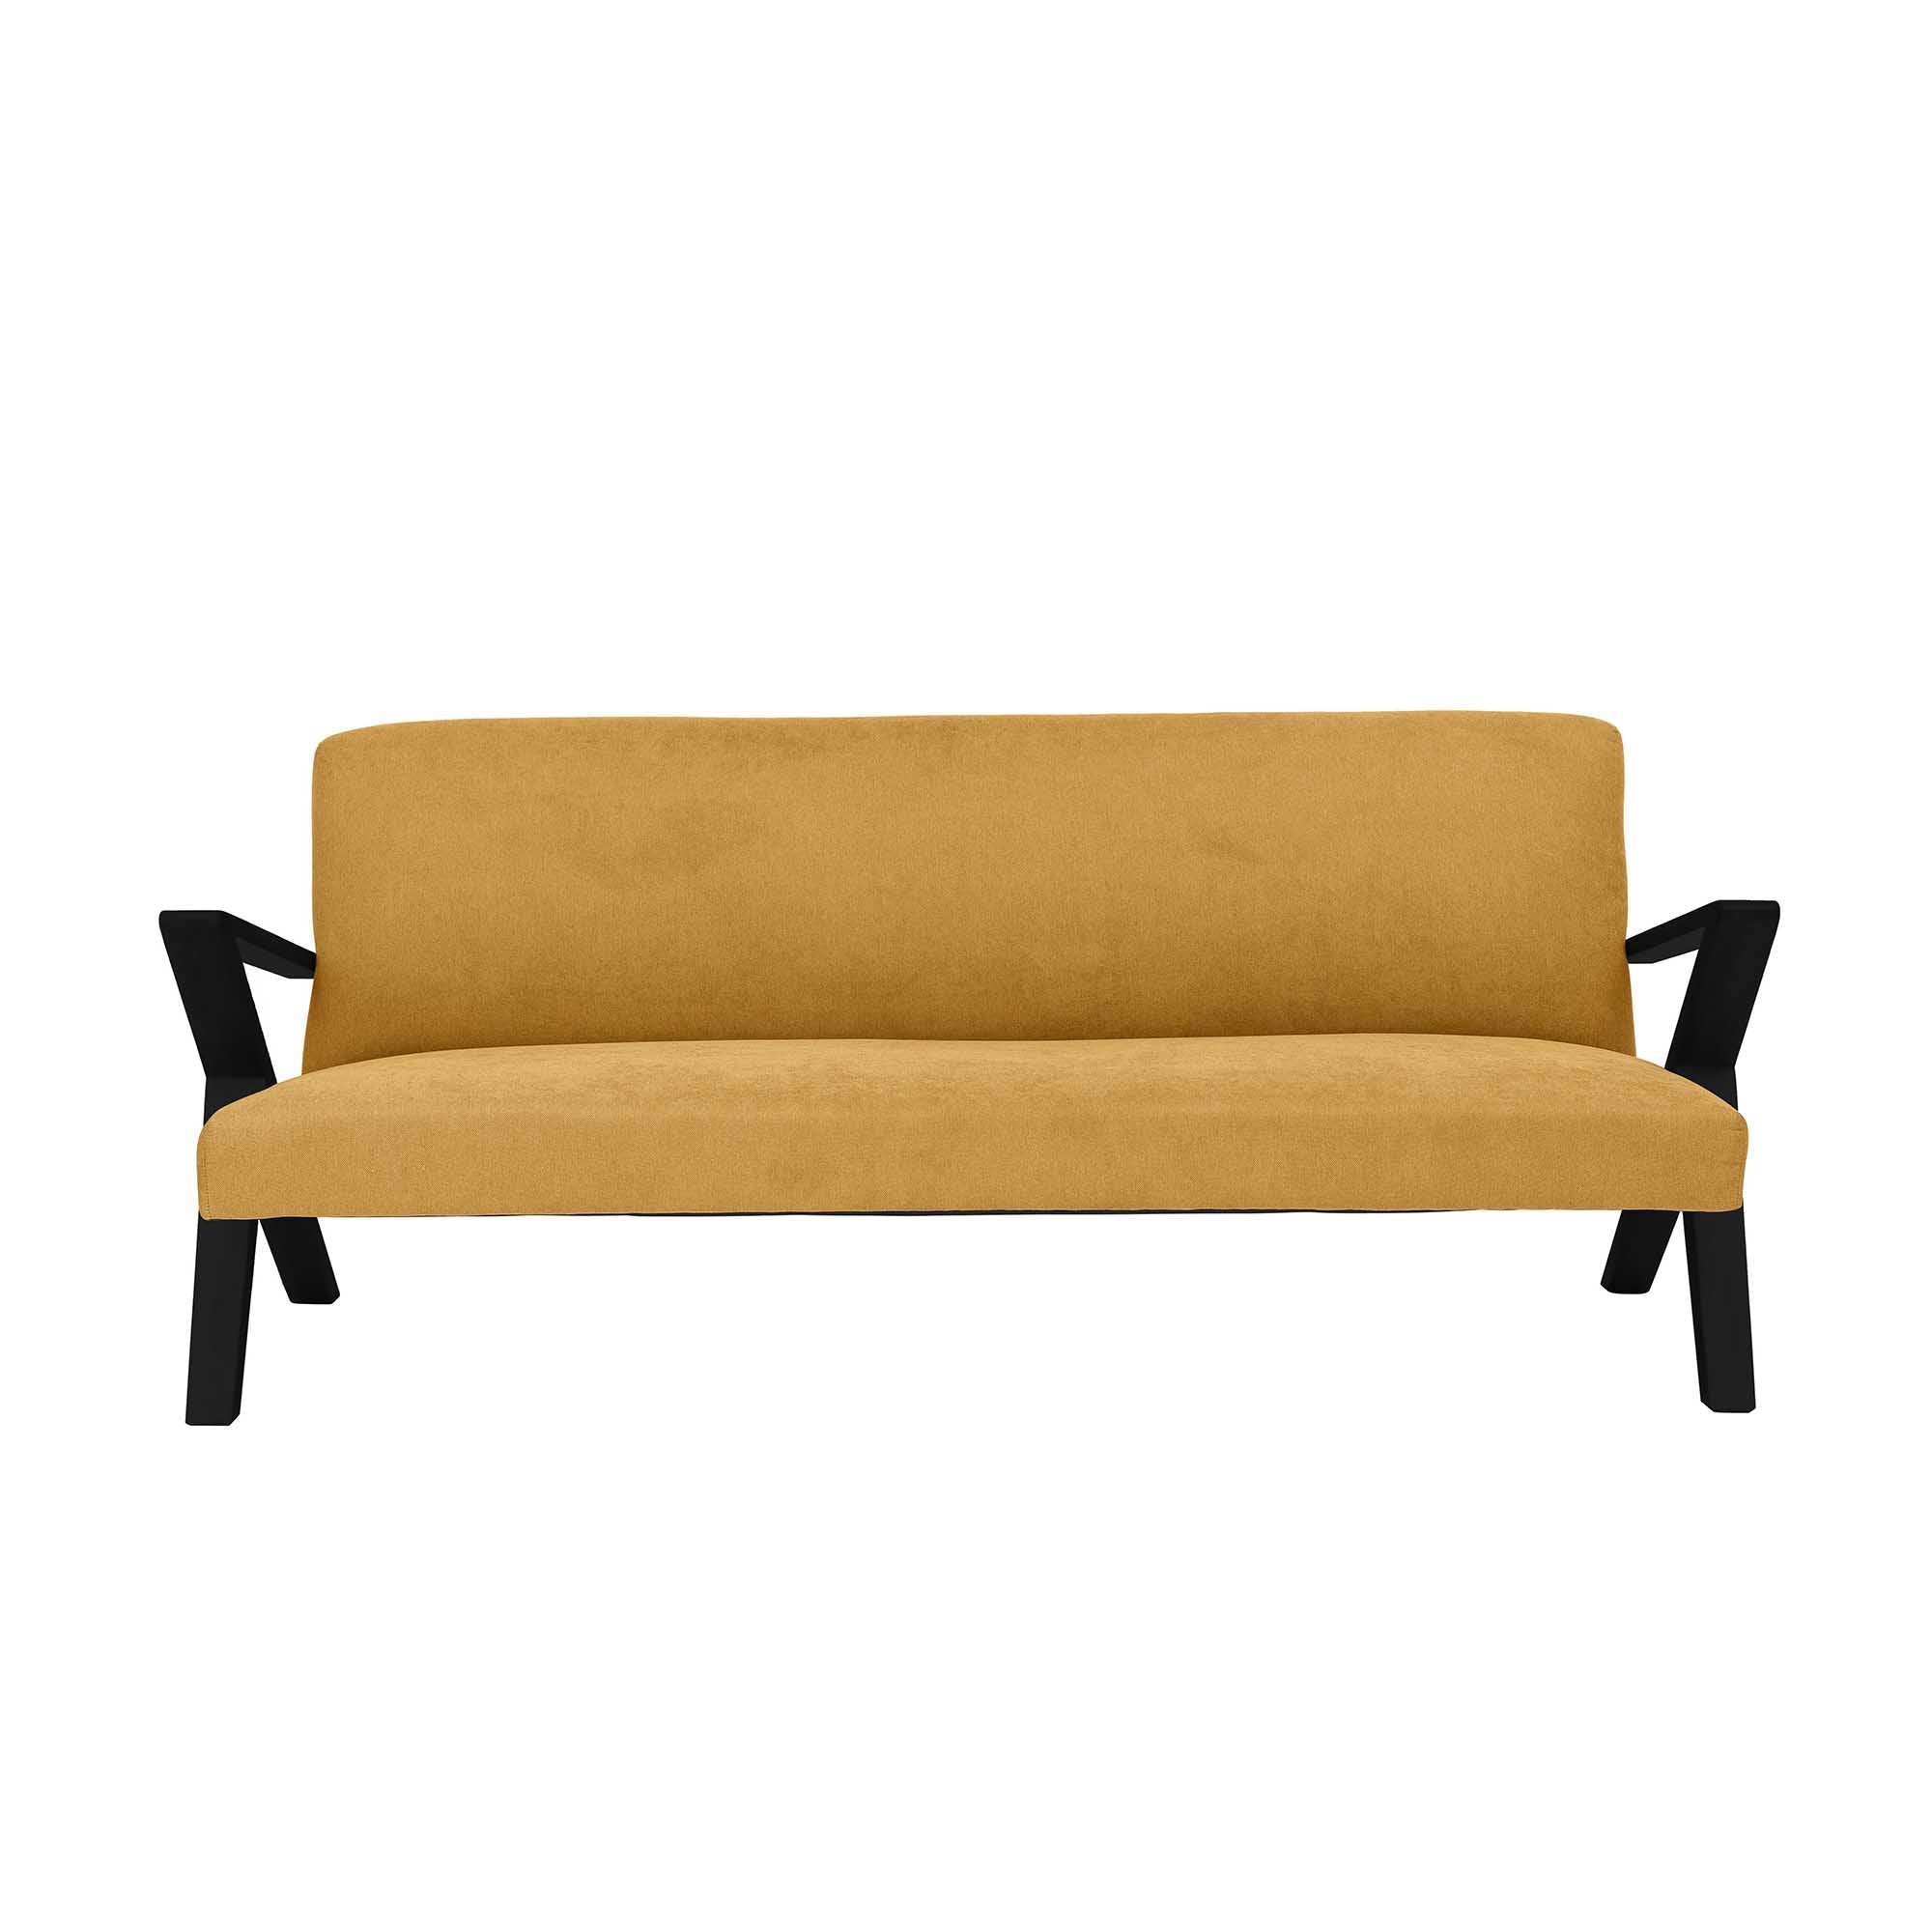  4-seater Sofa Beech Wood Frame, Black Lacquered yellowfabric, front view